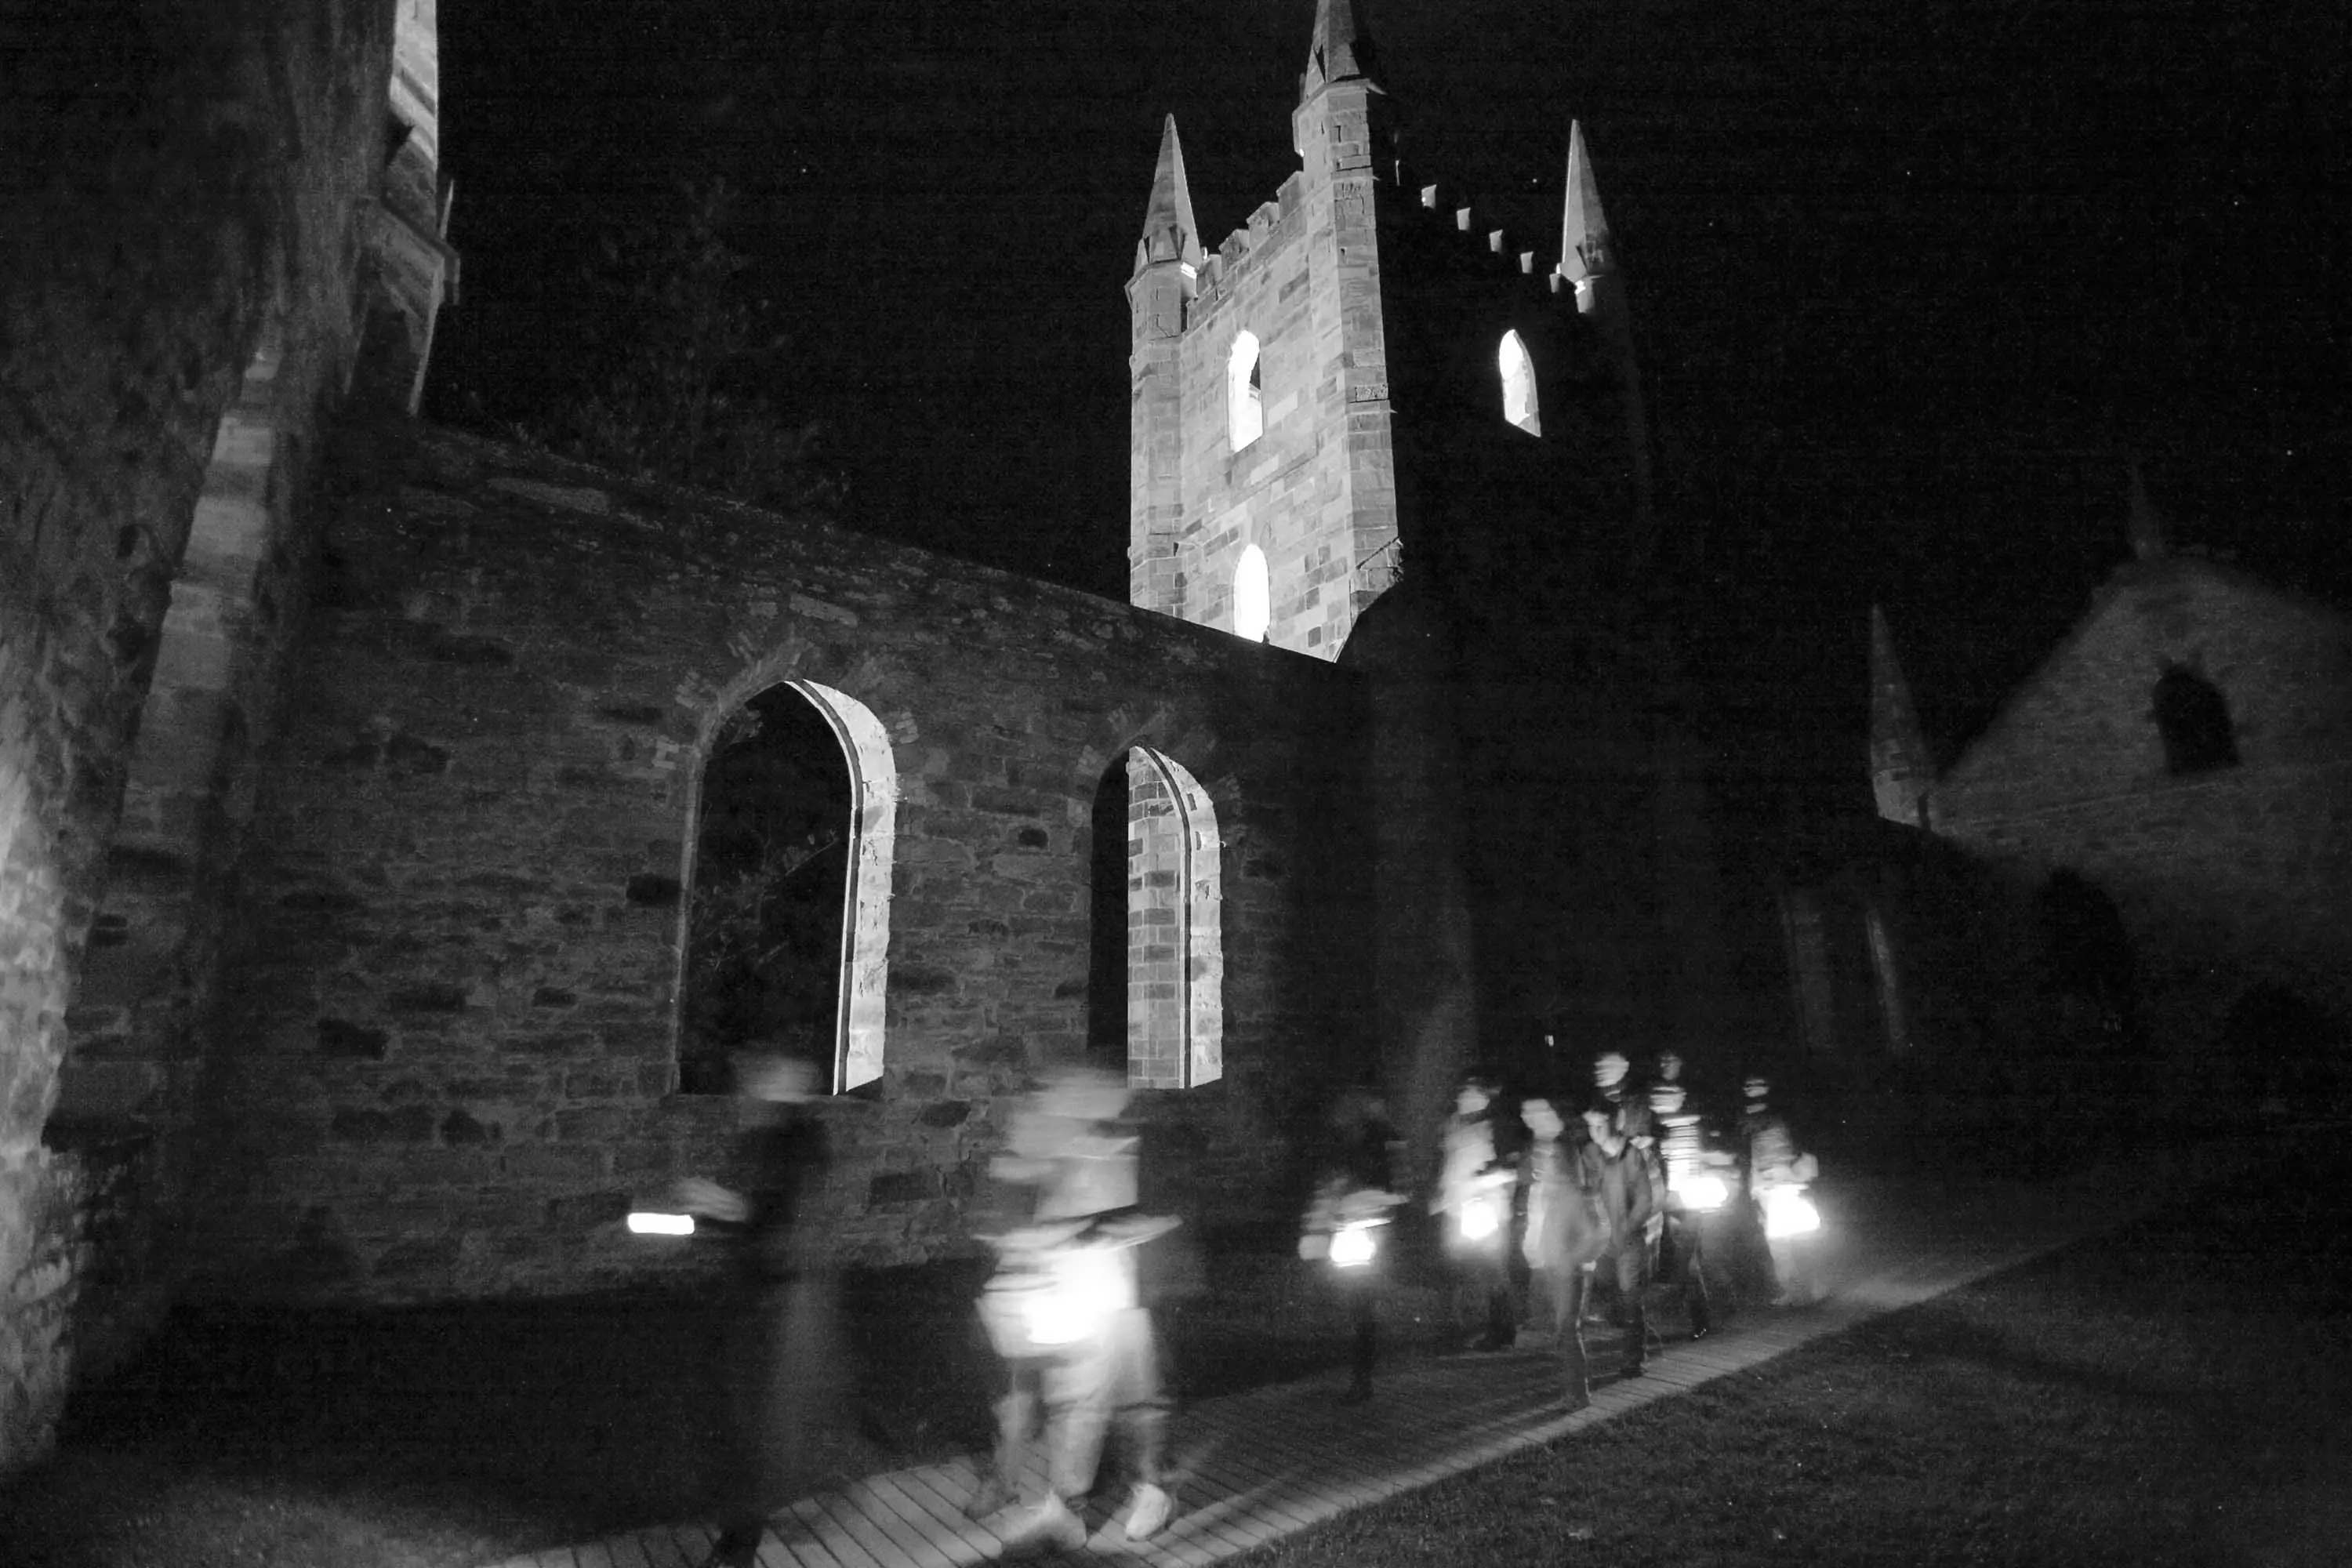 People walk along a dark pathway in front of a large, sandstone building with tall spires.